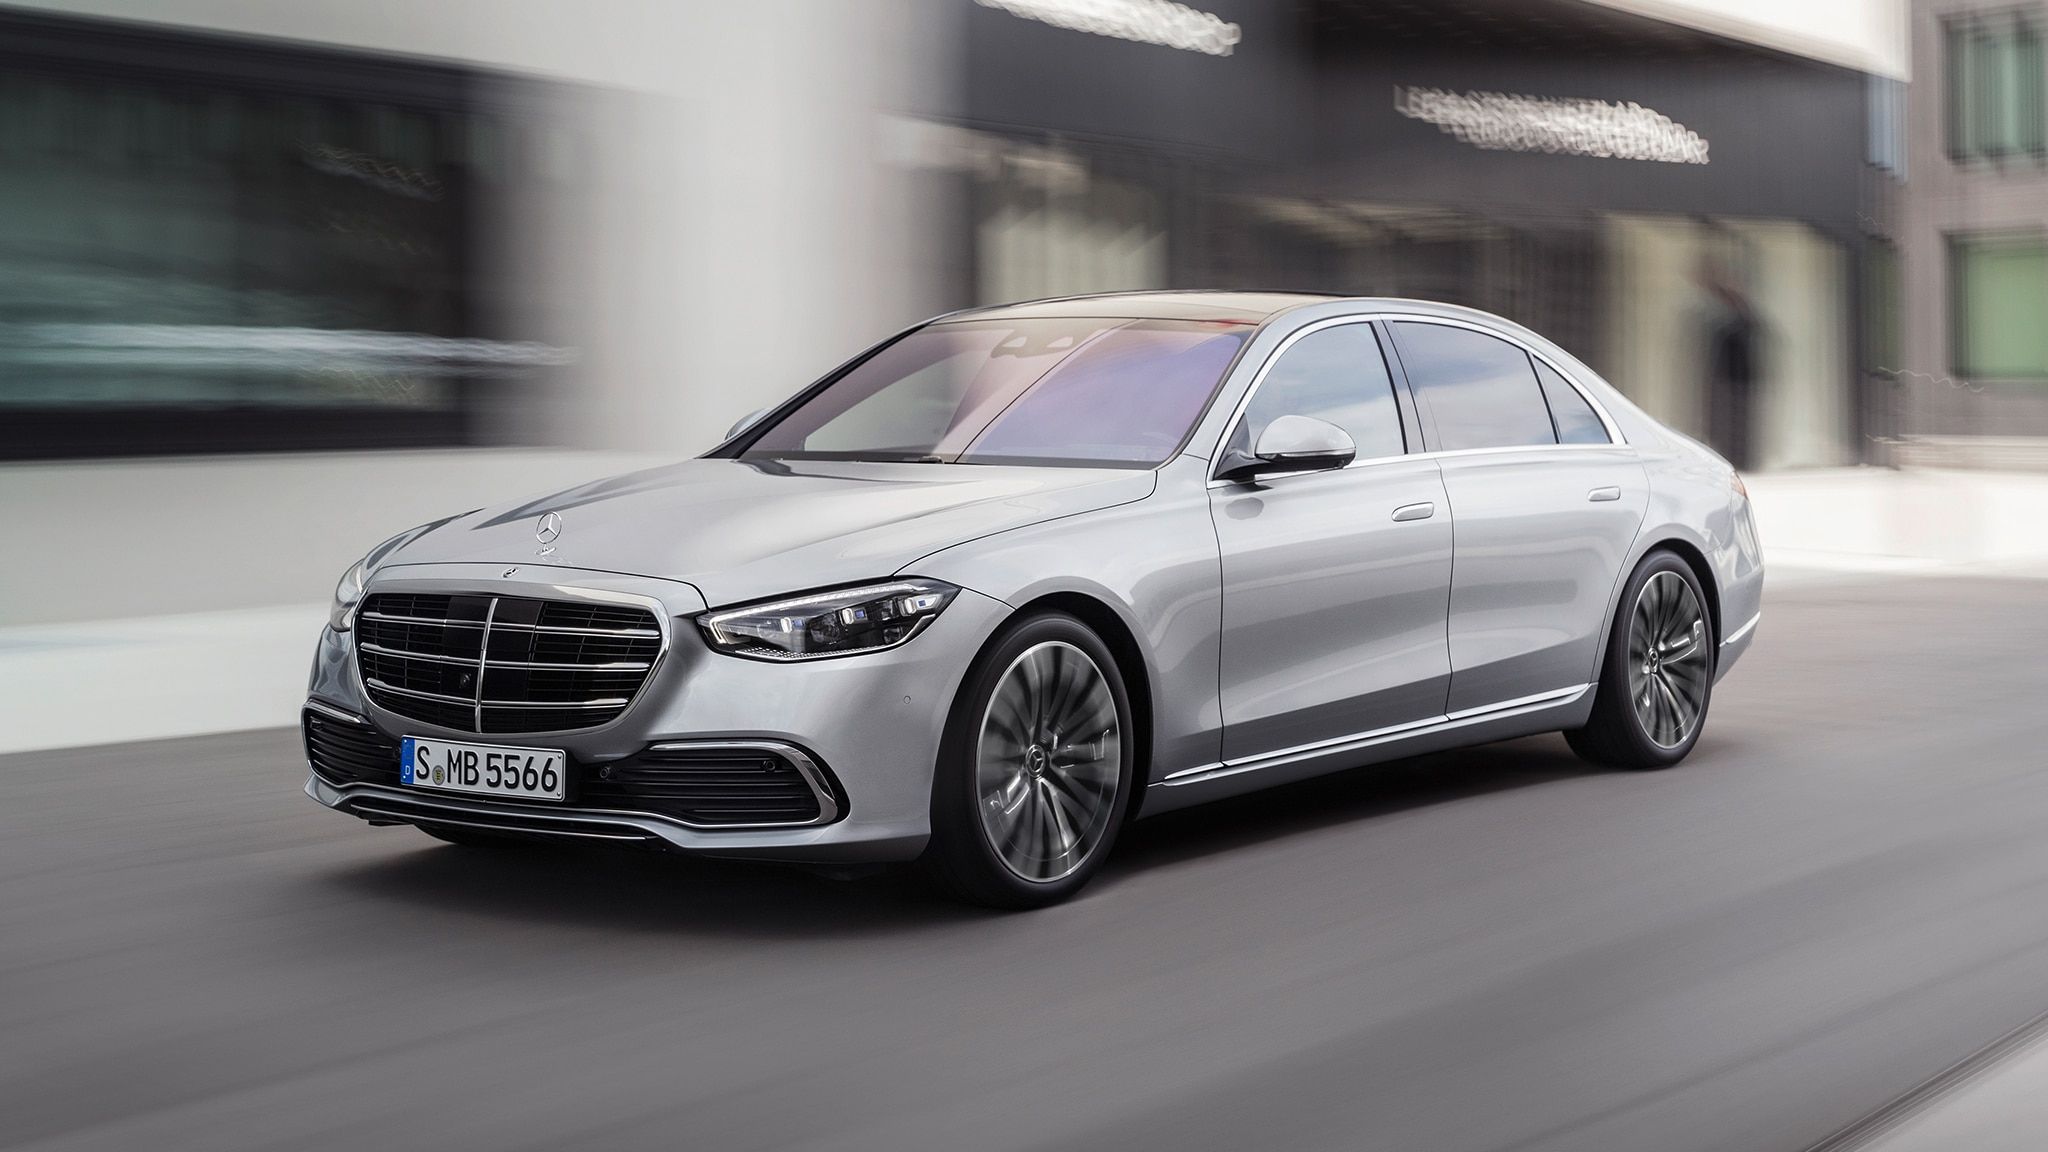 Mercedes Benz S Class First Look: The Luxury Sedan Benchmark Again Moves The Goalposts